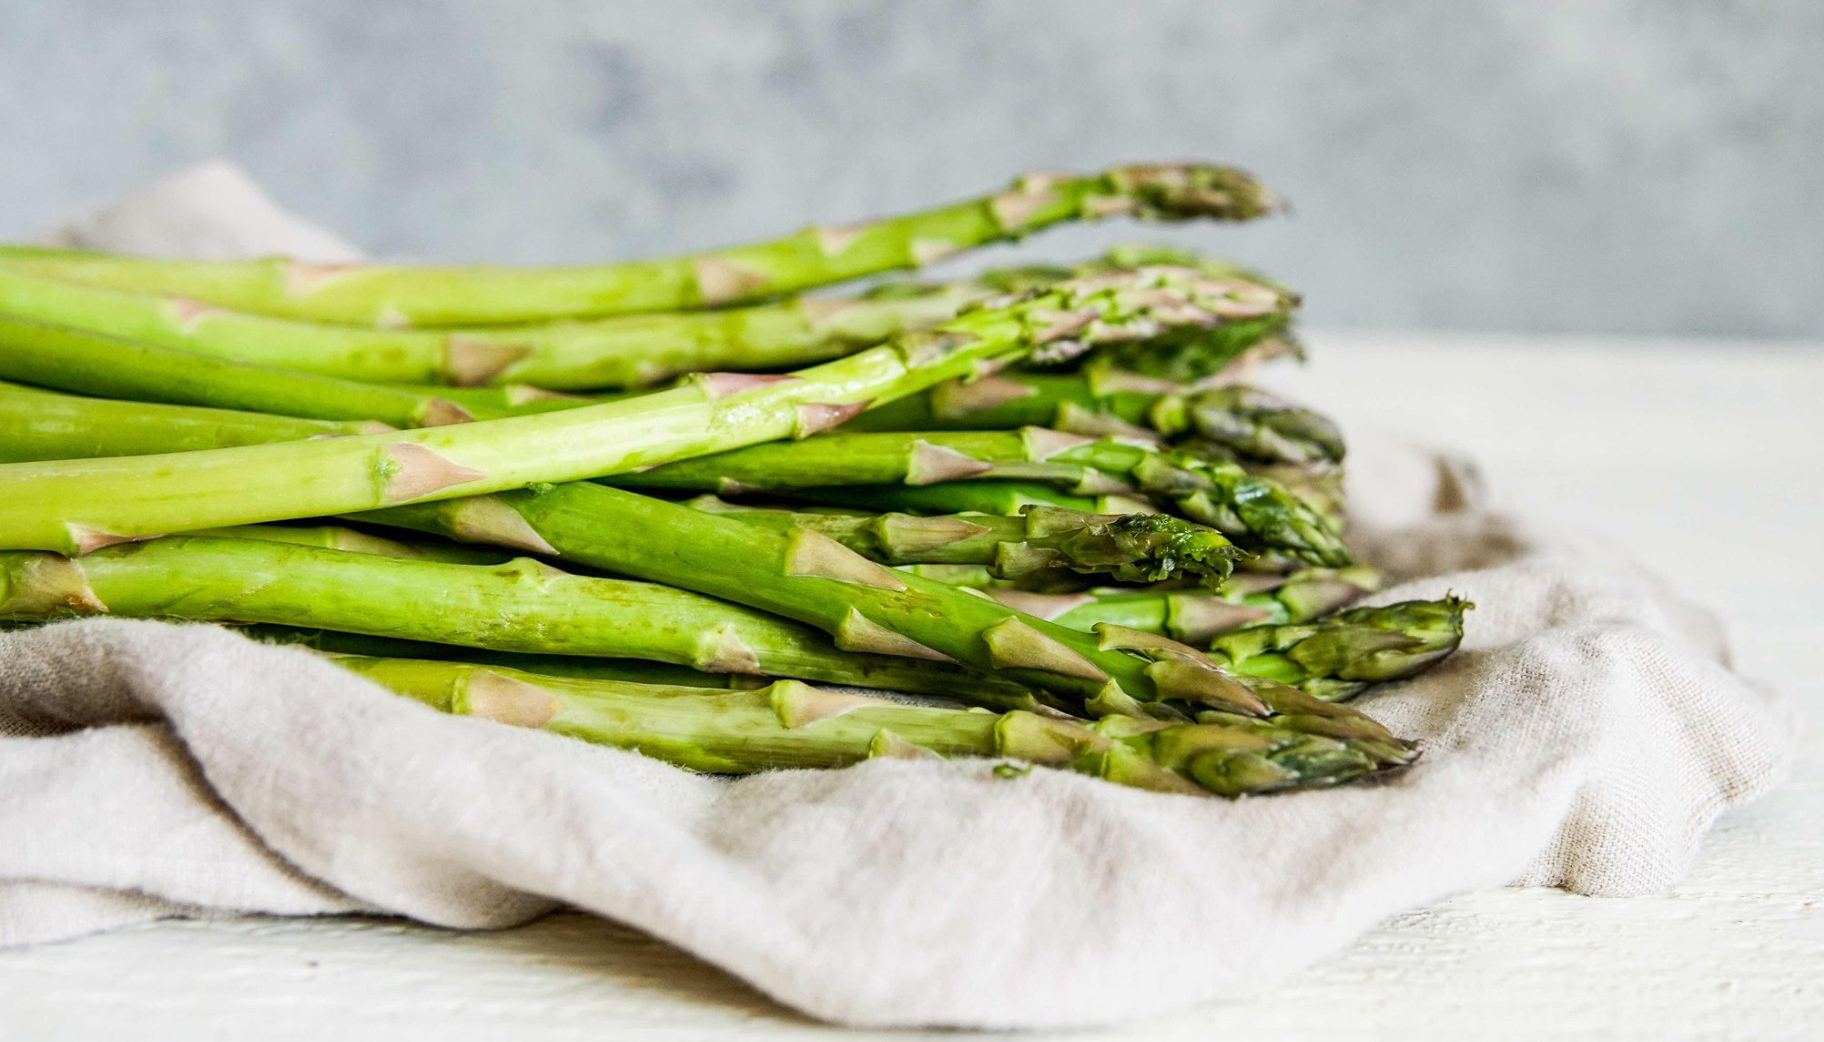 The Viagra Of Vegetables Health Benefits Of Asparagus Promoted As Harvest Kicks Off Newshub,What Is A Dogs Normal Temperature In Celsius